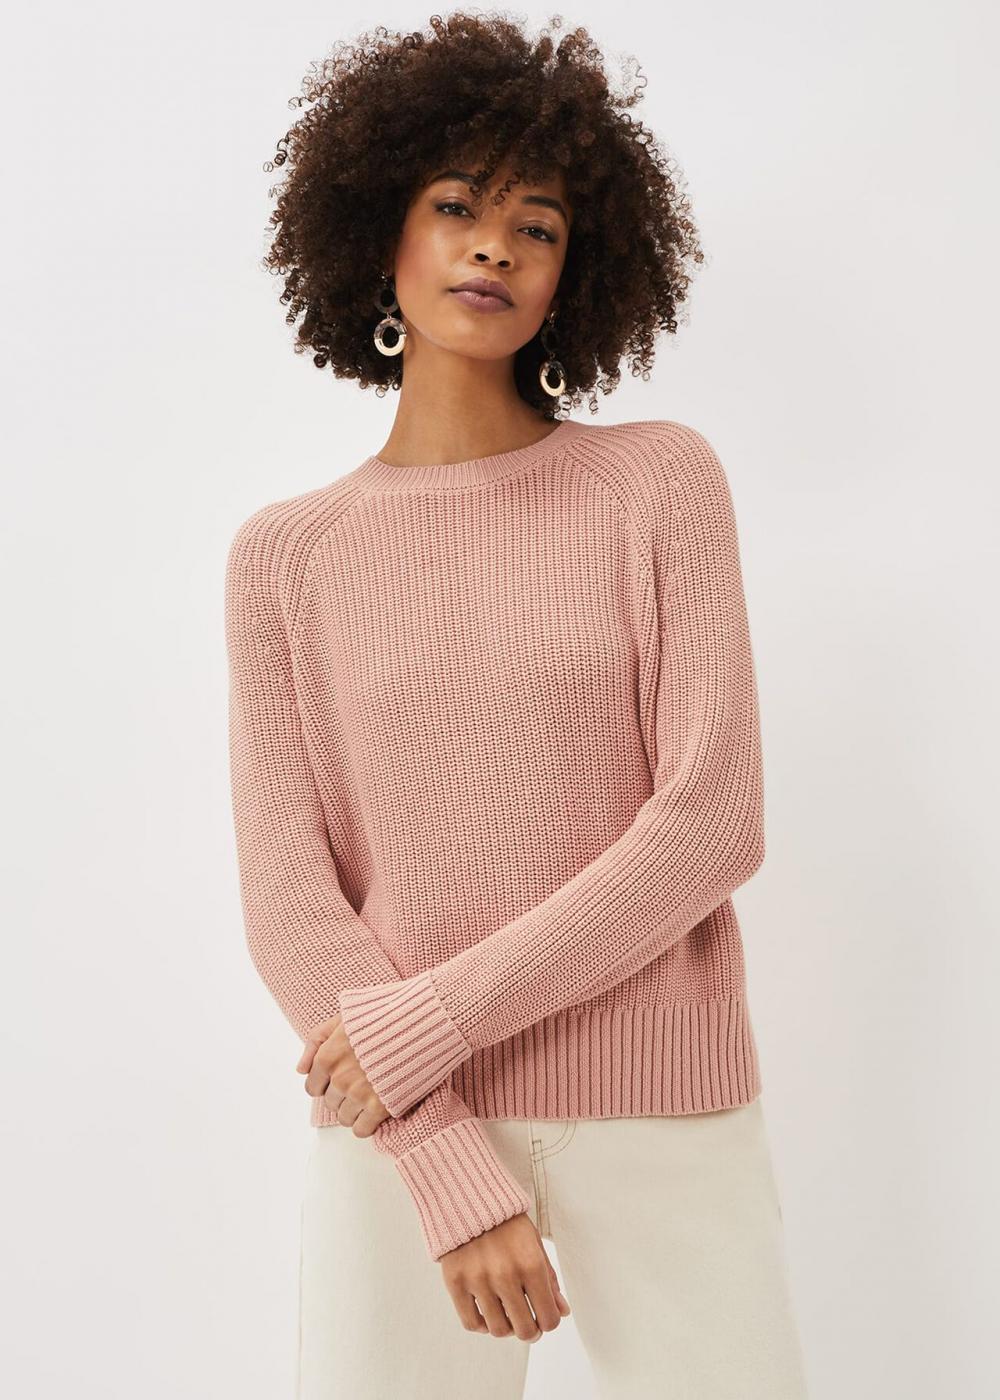 Susan Textured Knitted Jumper Pink | Phase Eight Womens Jumpers & Cardigans